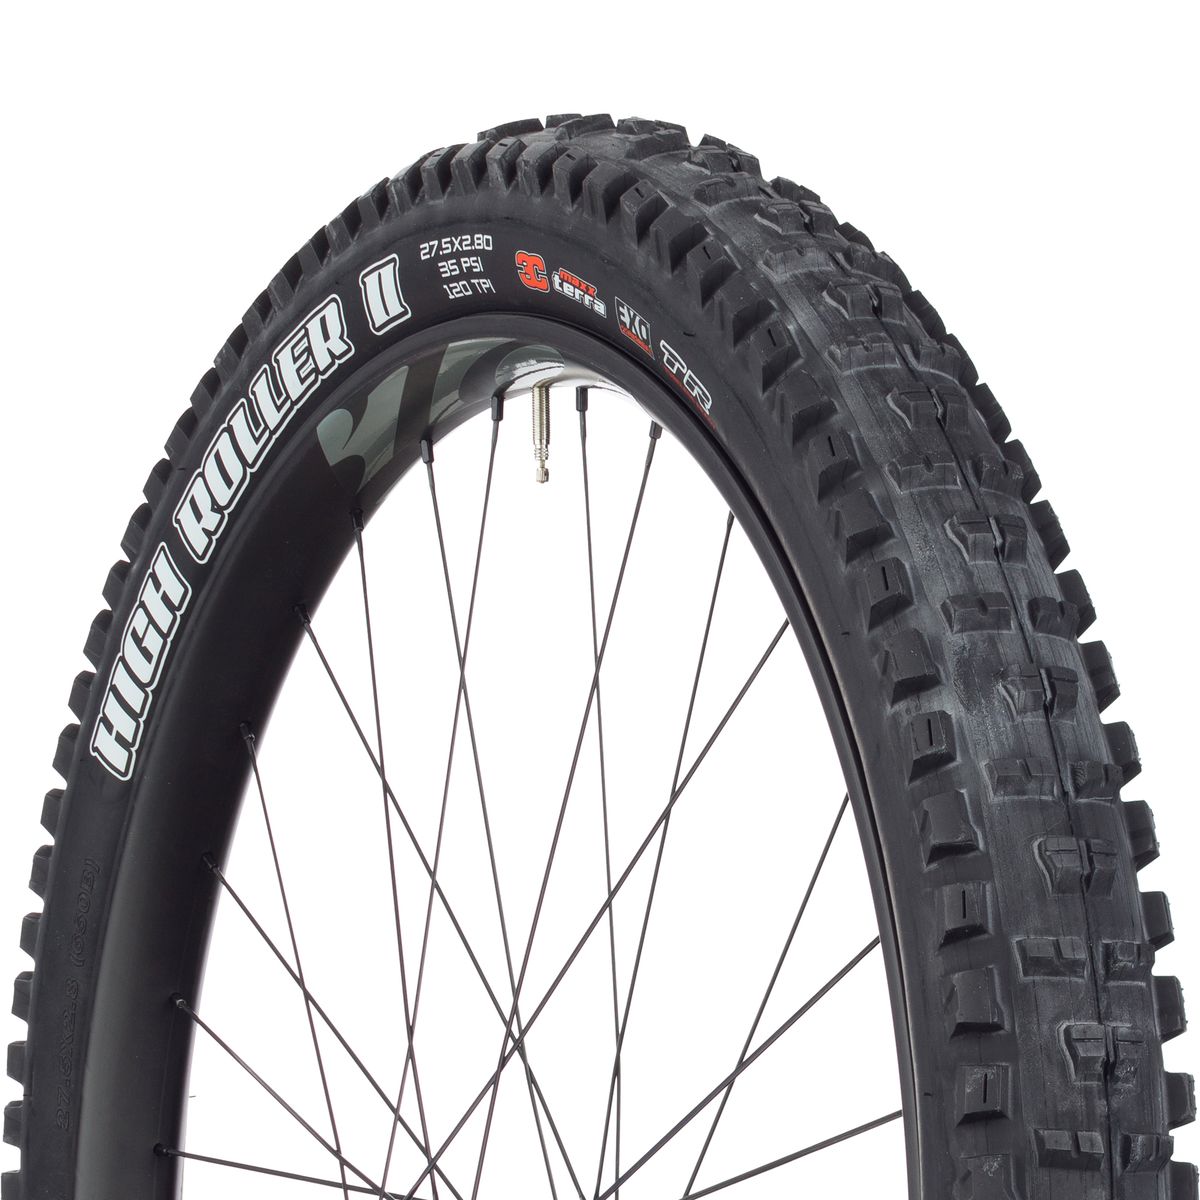 Maxxis High Roller II 3C/EXO/TR 27.5+ Tire